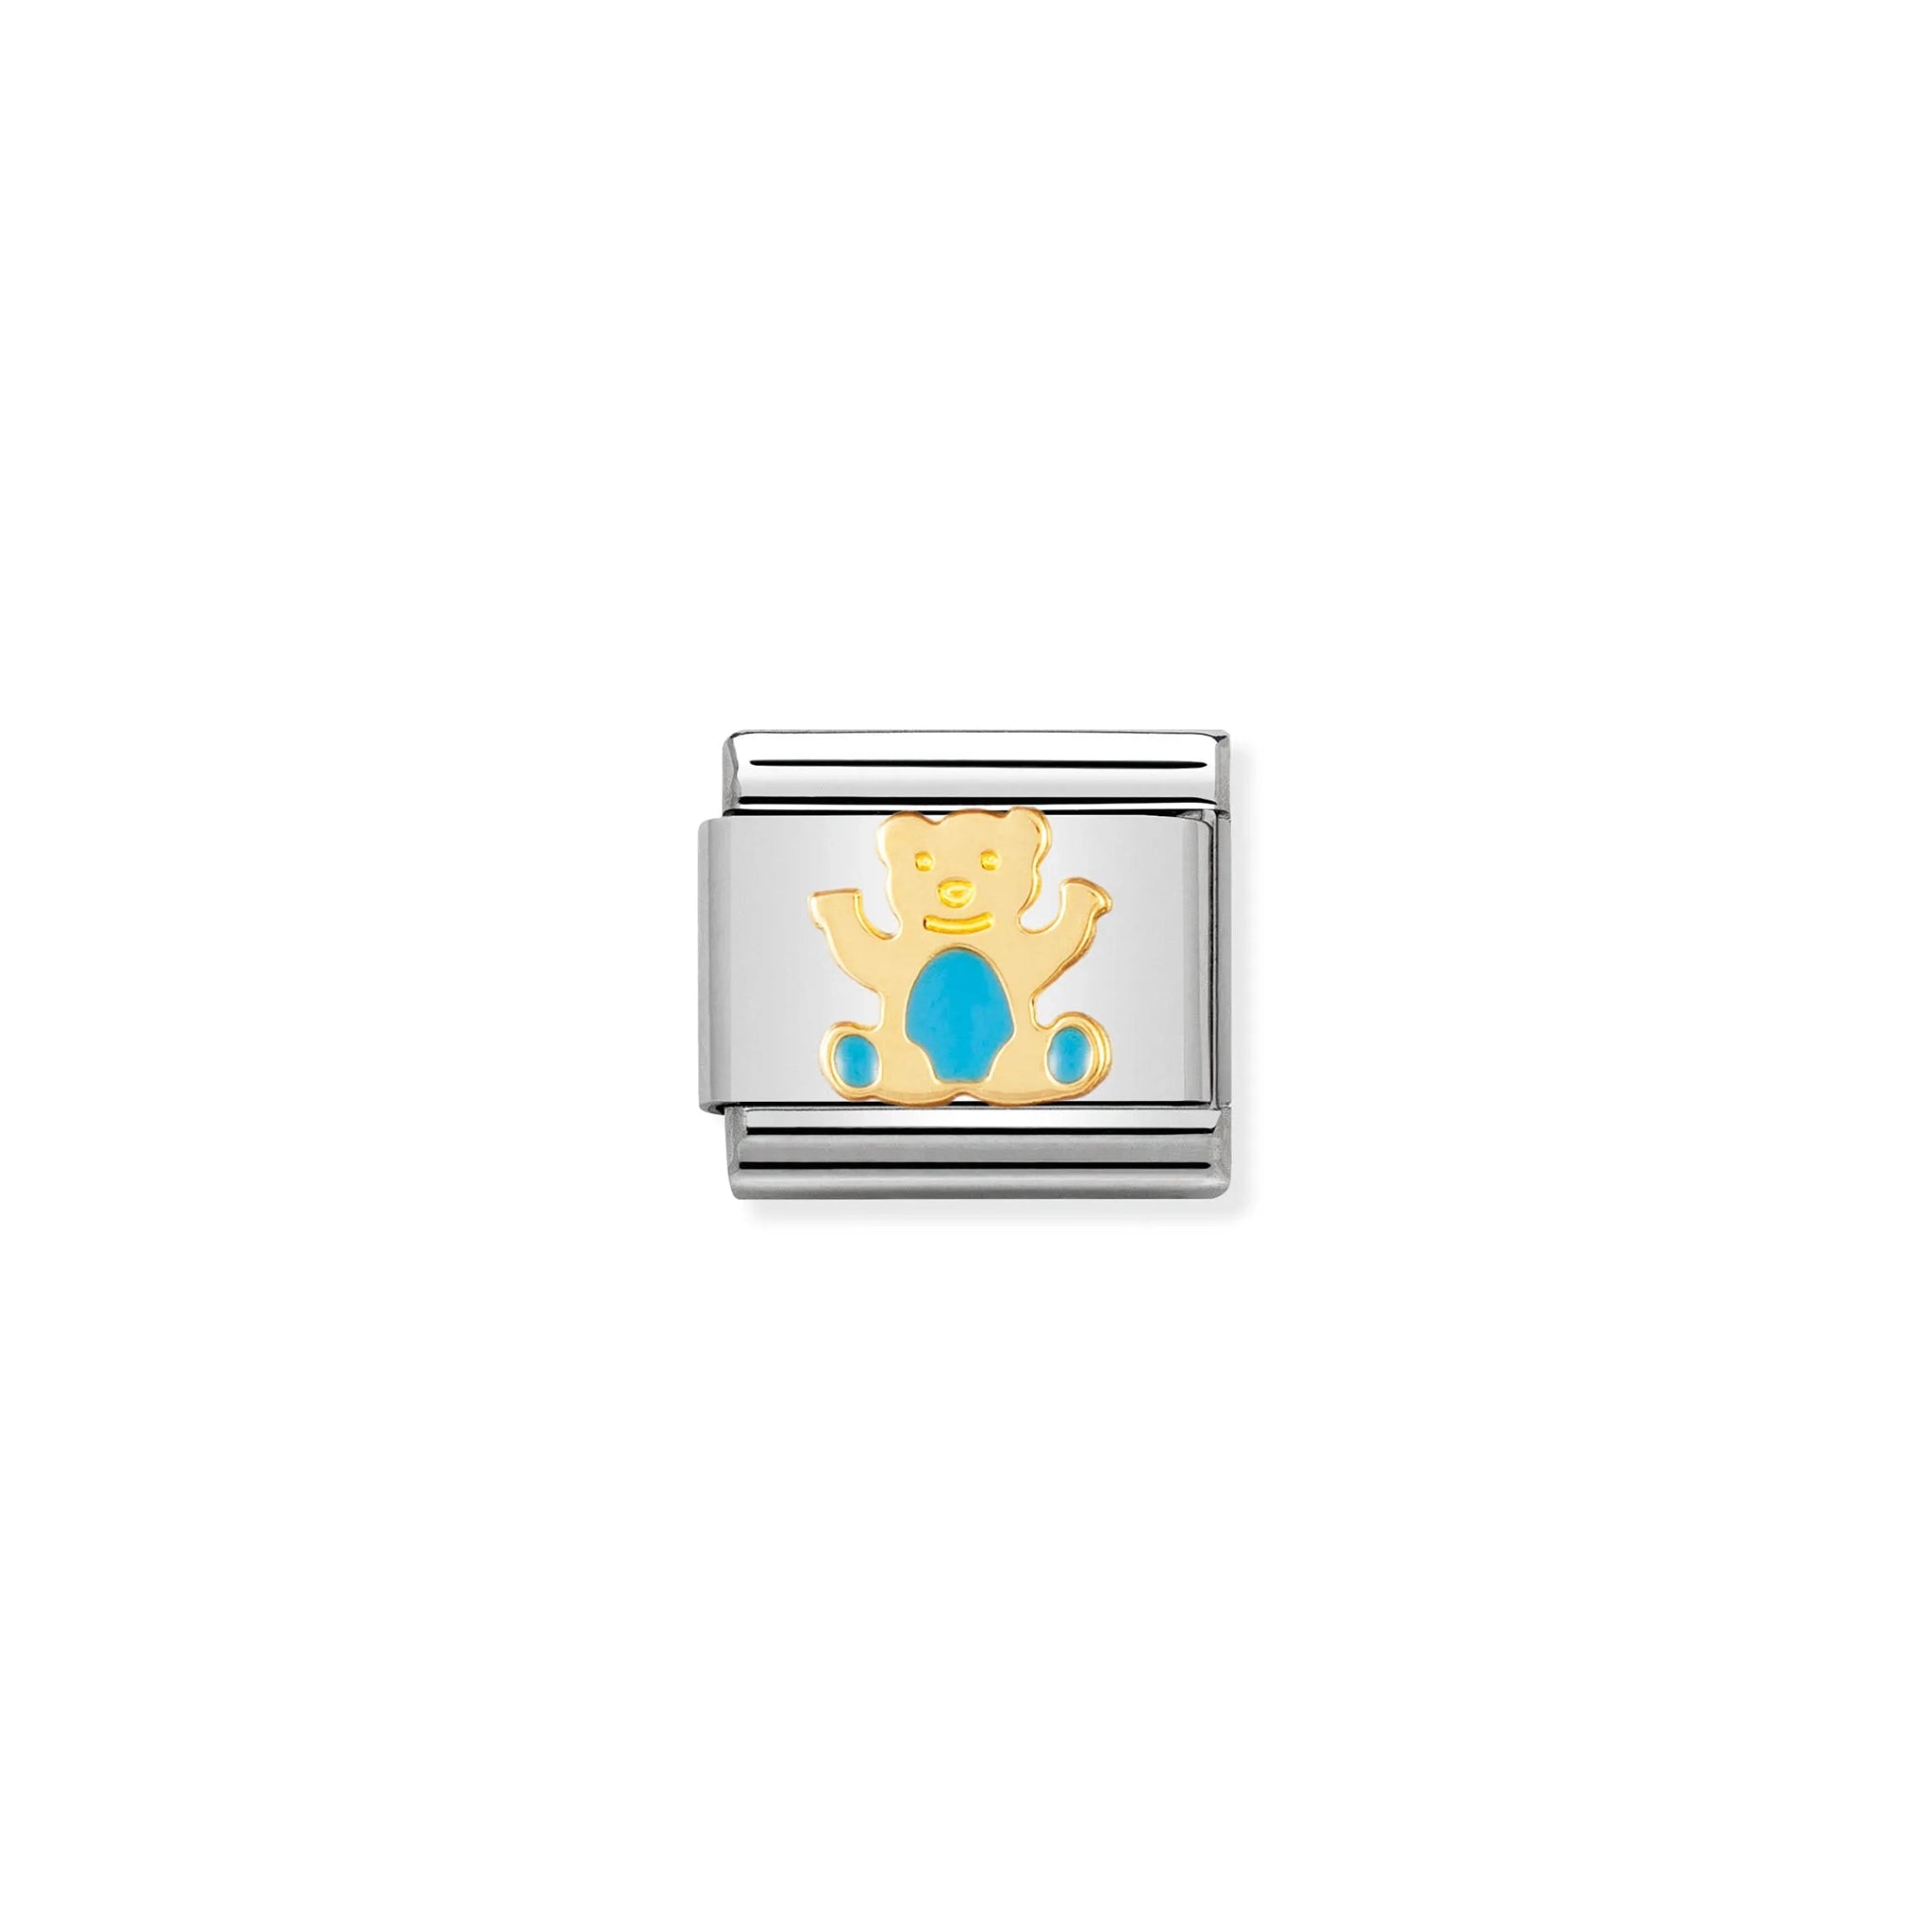 A Nomination charm link featuring a gold teddy bear with a light blue enamel tummy